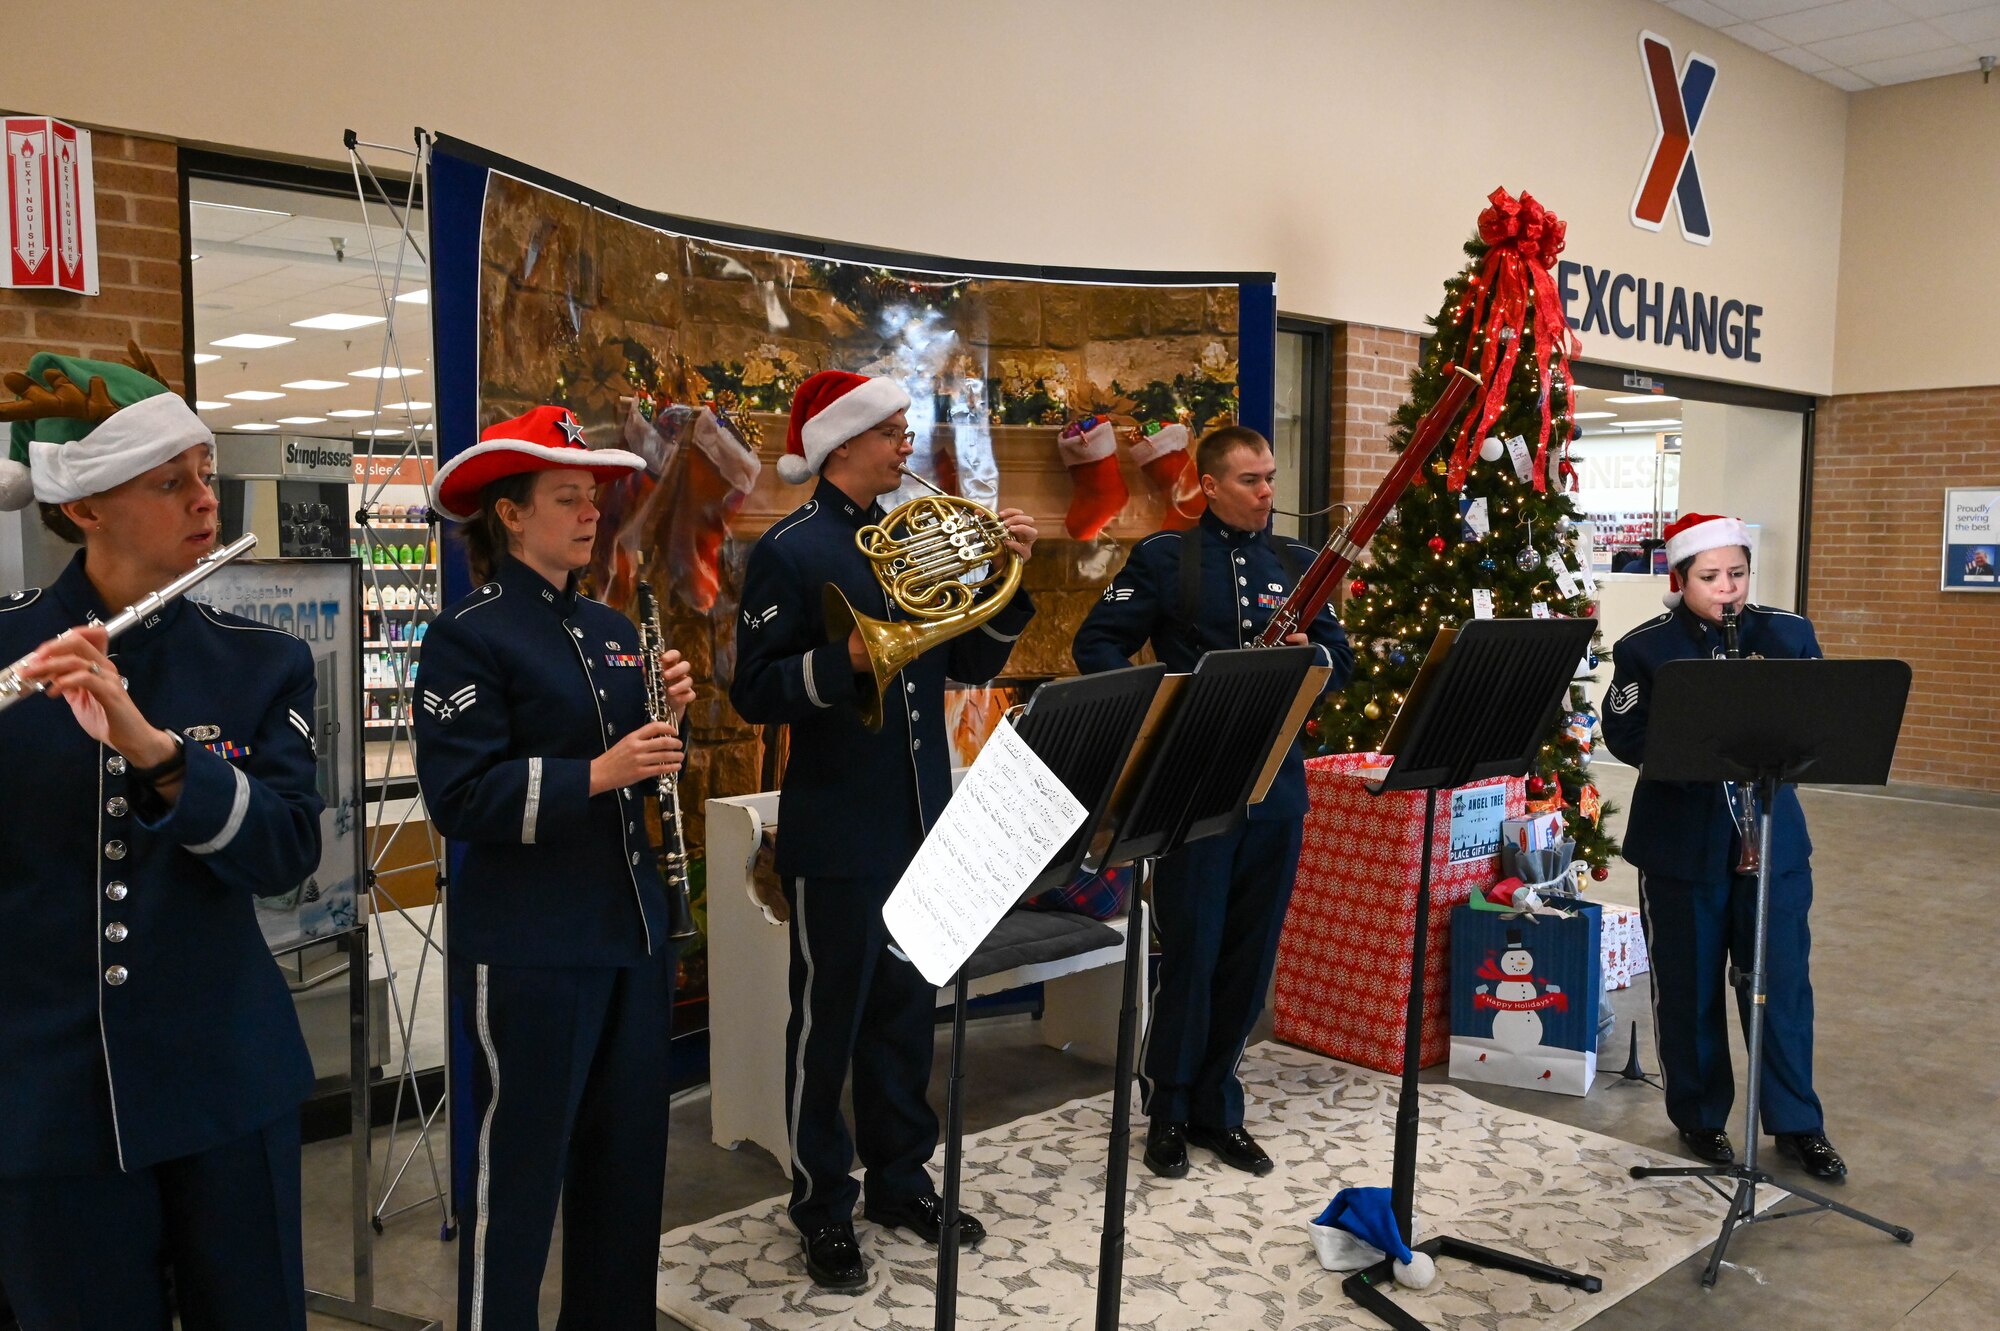 The U.S. Air Force Band of the West performs at the Base Exchange at Altus Air Force Base, Oklahoma, Dec. 14, 2021. The USAF Band of the West travels more than 125,000 miles annually and provides hundreds of performances to military and civilian audiences throughout Texas, Oklahoma, Louisiana, Mississippi, Alabama, Georgia, Florida, and Puerto Rico. (U.S. Air Force photo by Airman 1st Class Kayla Christenson)